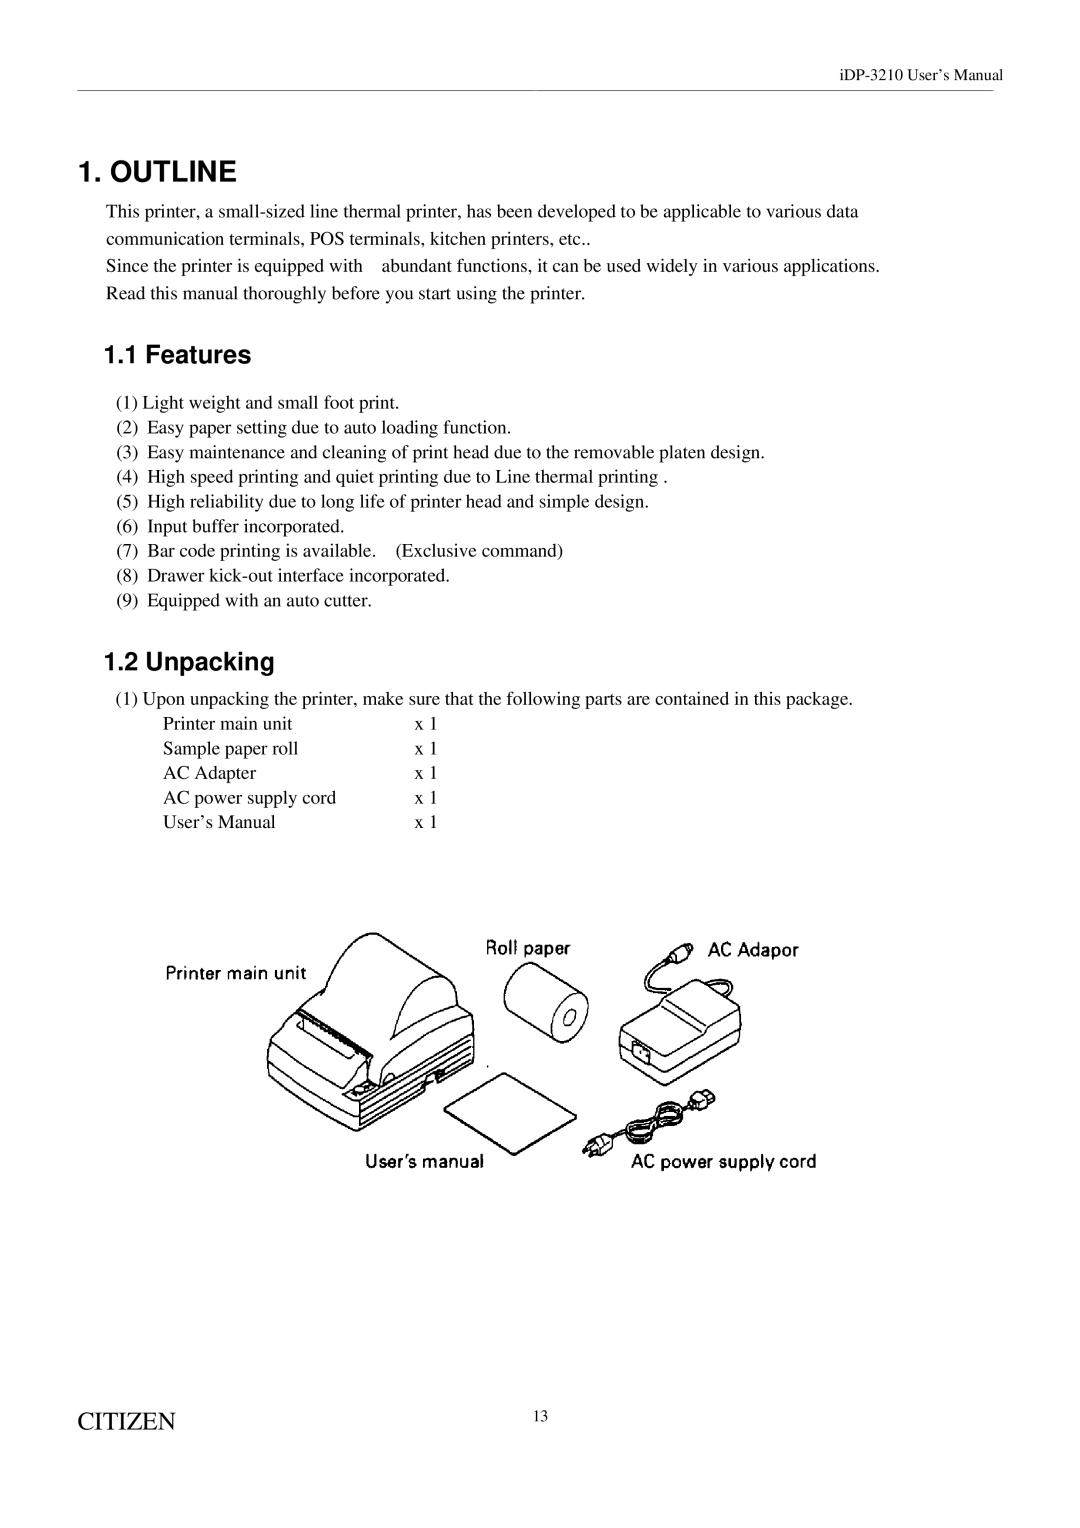 Citizen Systems iDP-3210 user manual Features, Unpacking 